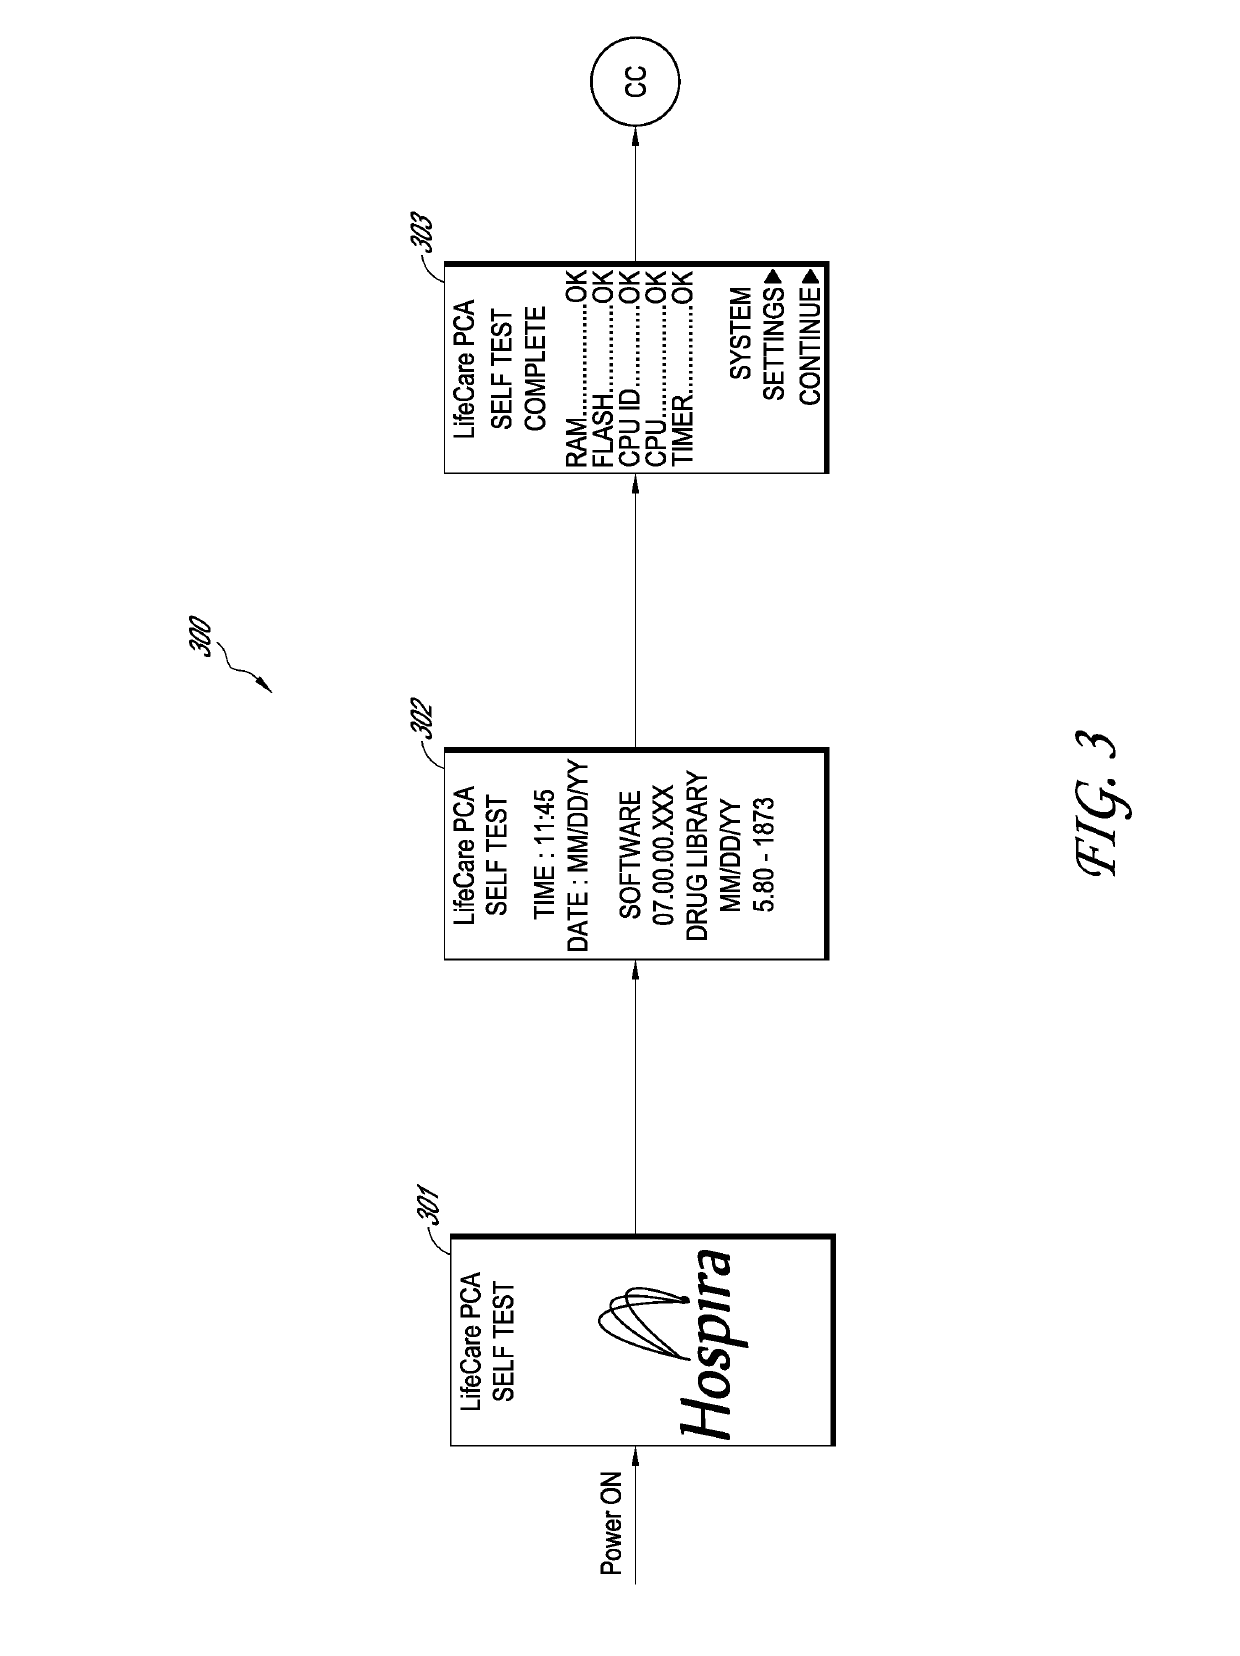 Control of a drug infusion device